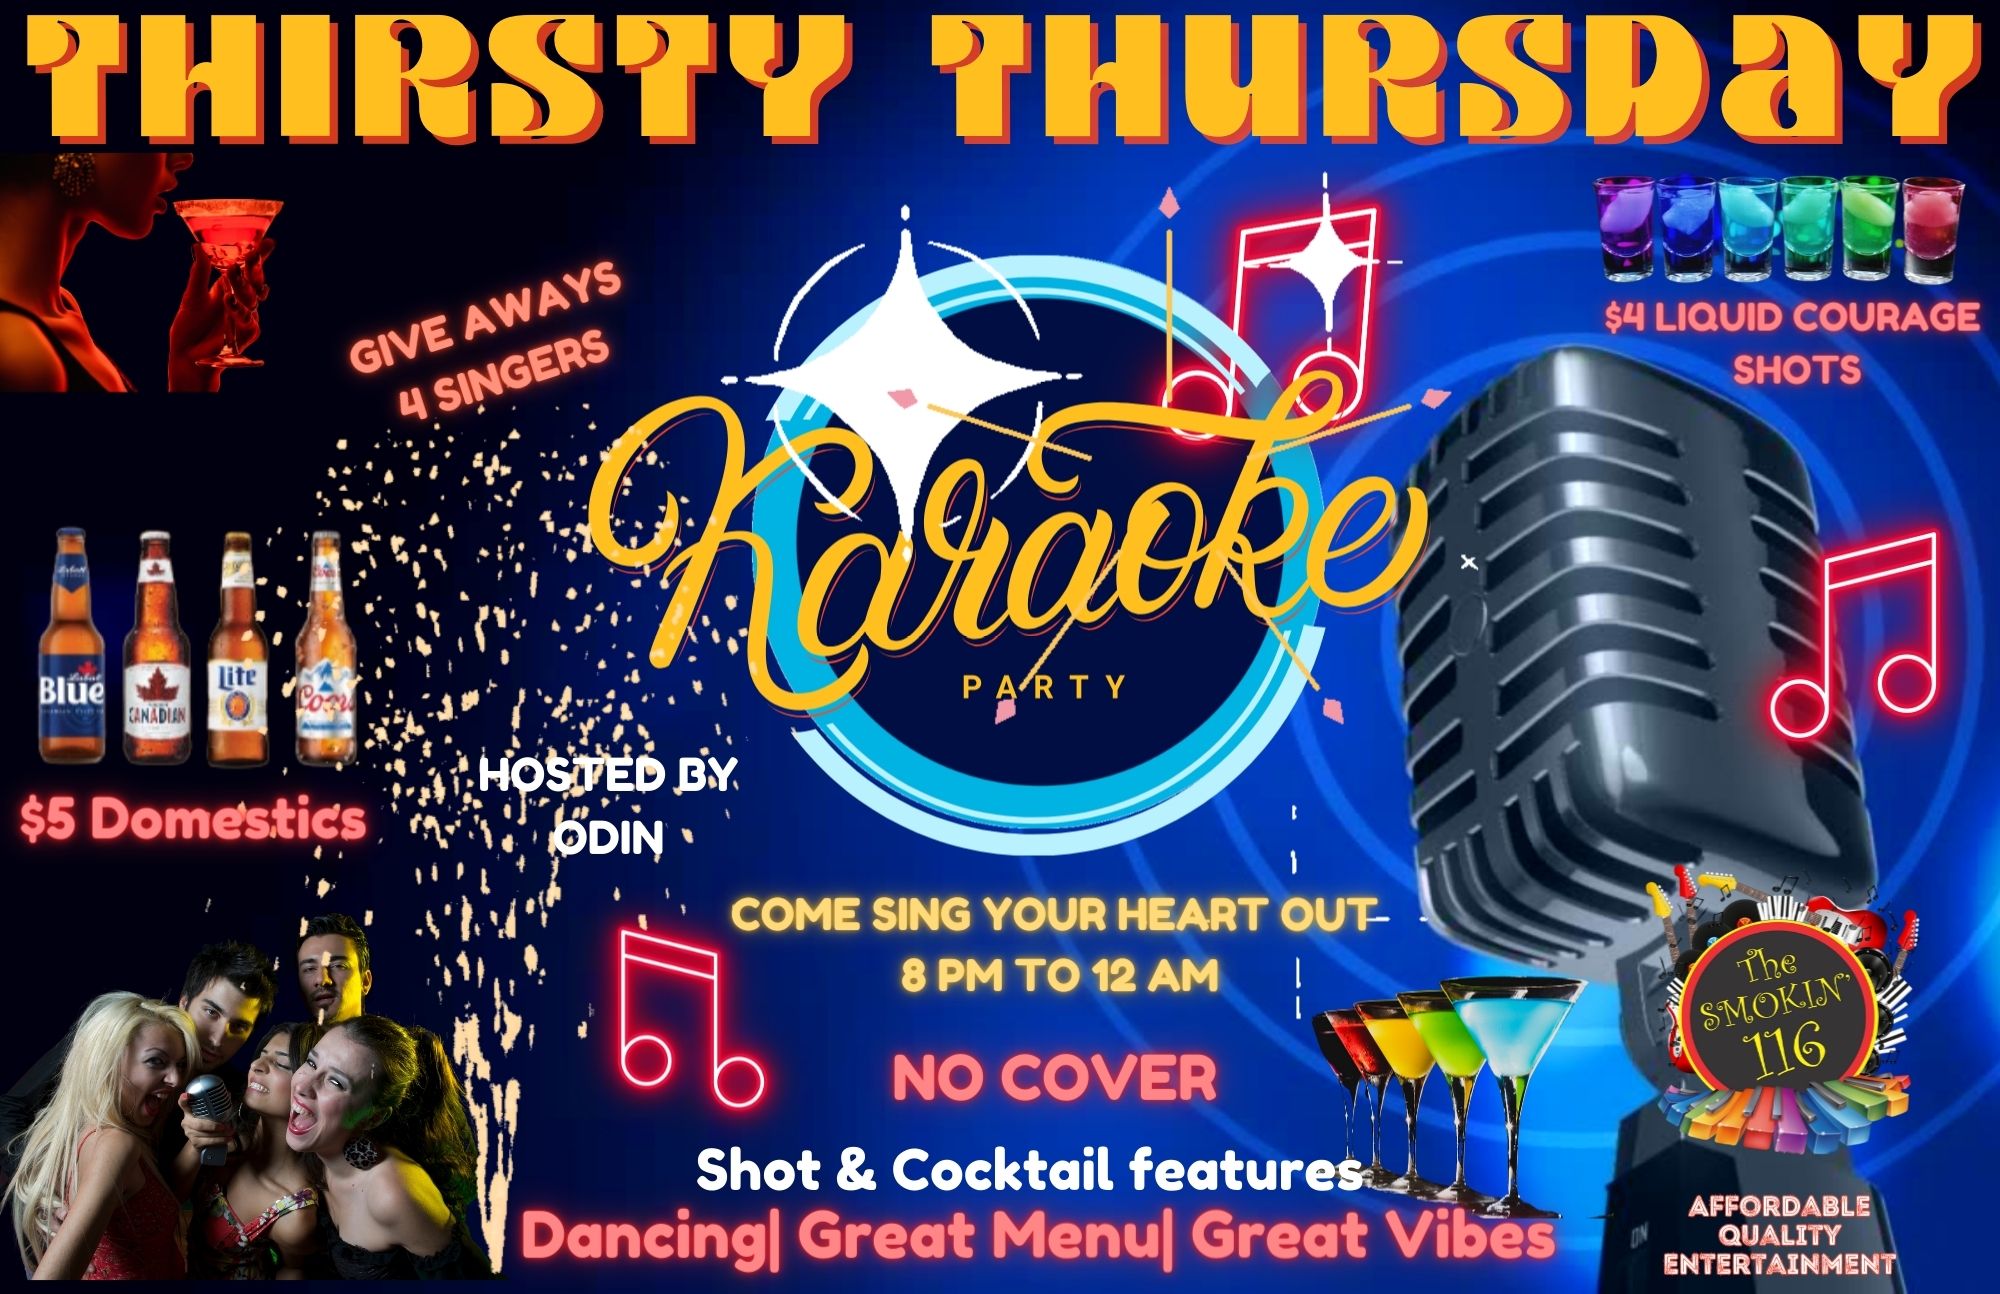 poster titled "Thirsty Thursday Karaoke" has images of microphones, music notes and other bar related content.